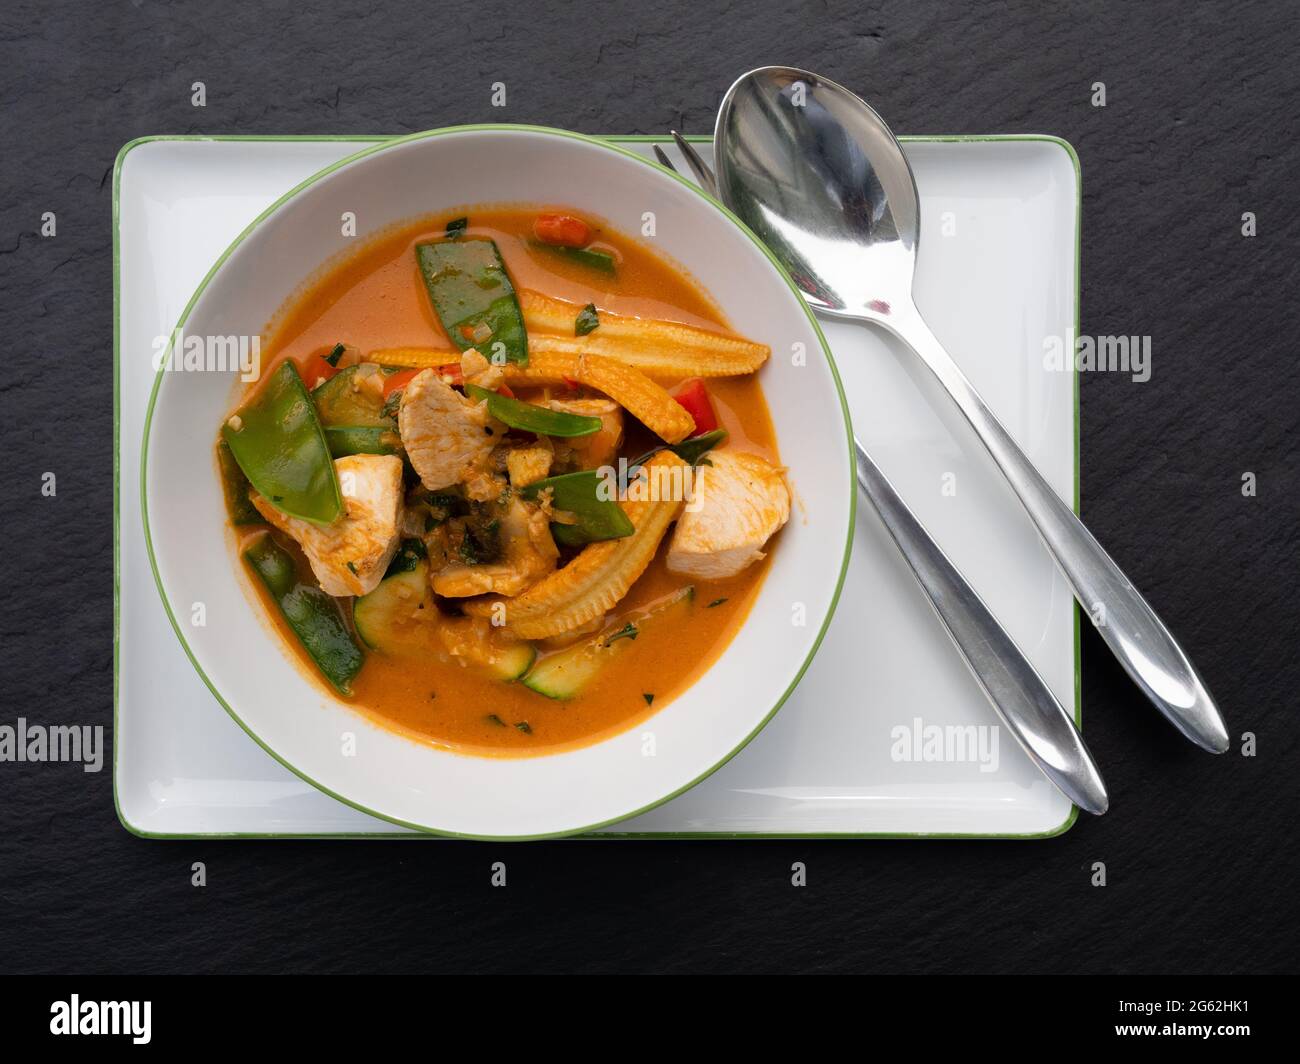 Spicy Red Thai Curry with Chicken and Vegetables in a Bowl, Top View Stock Photo